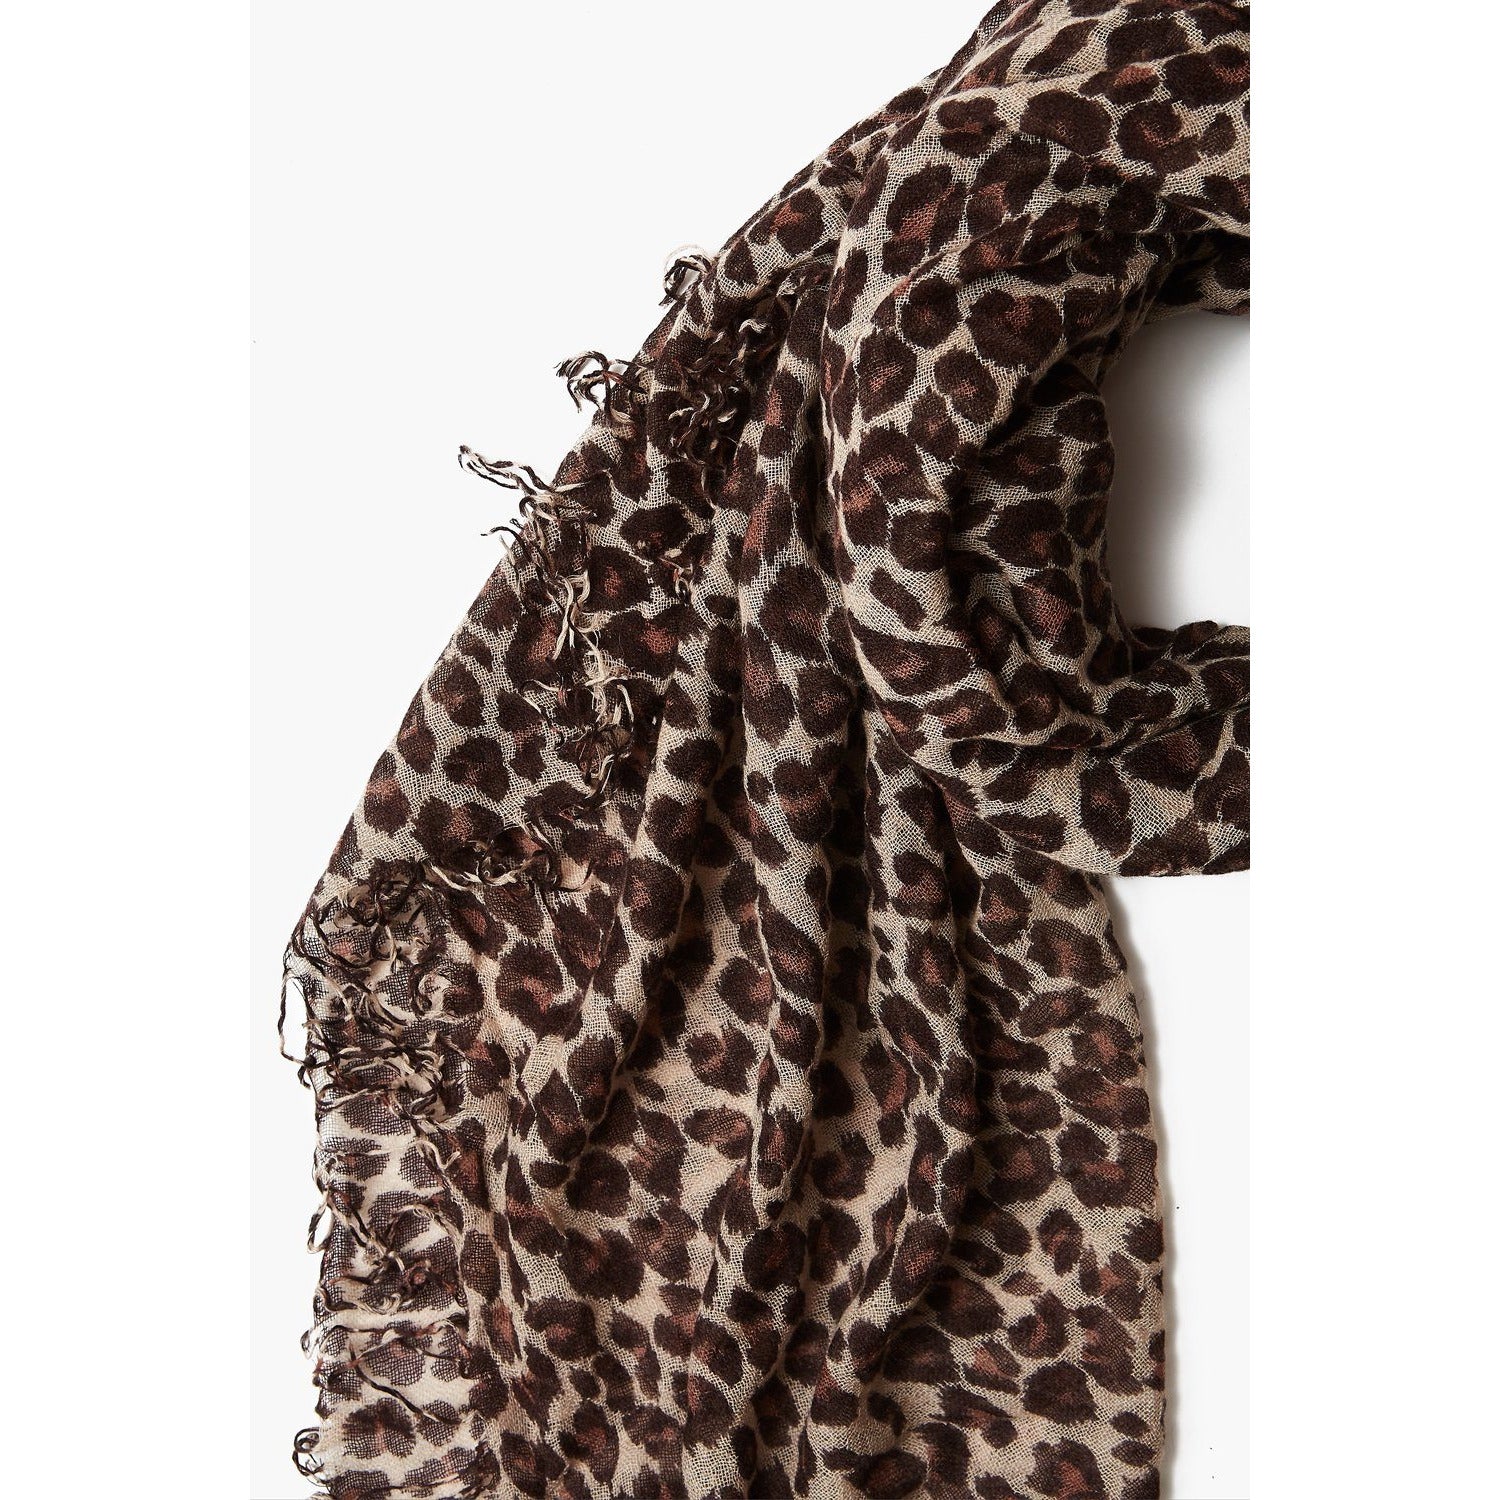 ROASTED PECAN LEOPARD PRINT CASHMERE AND SILK SCARF